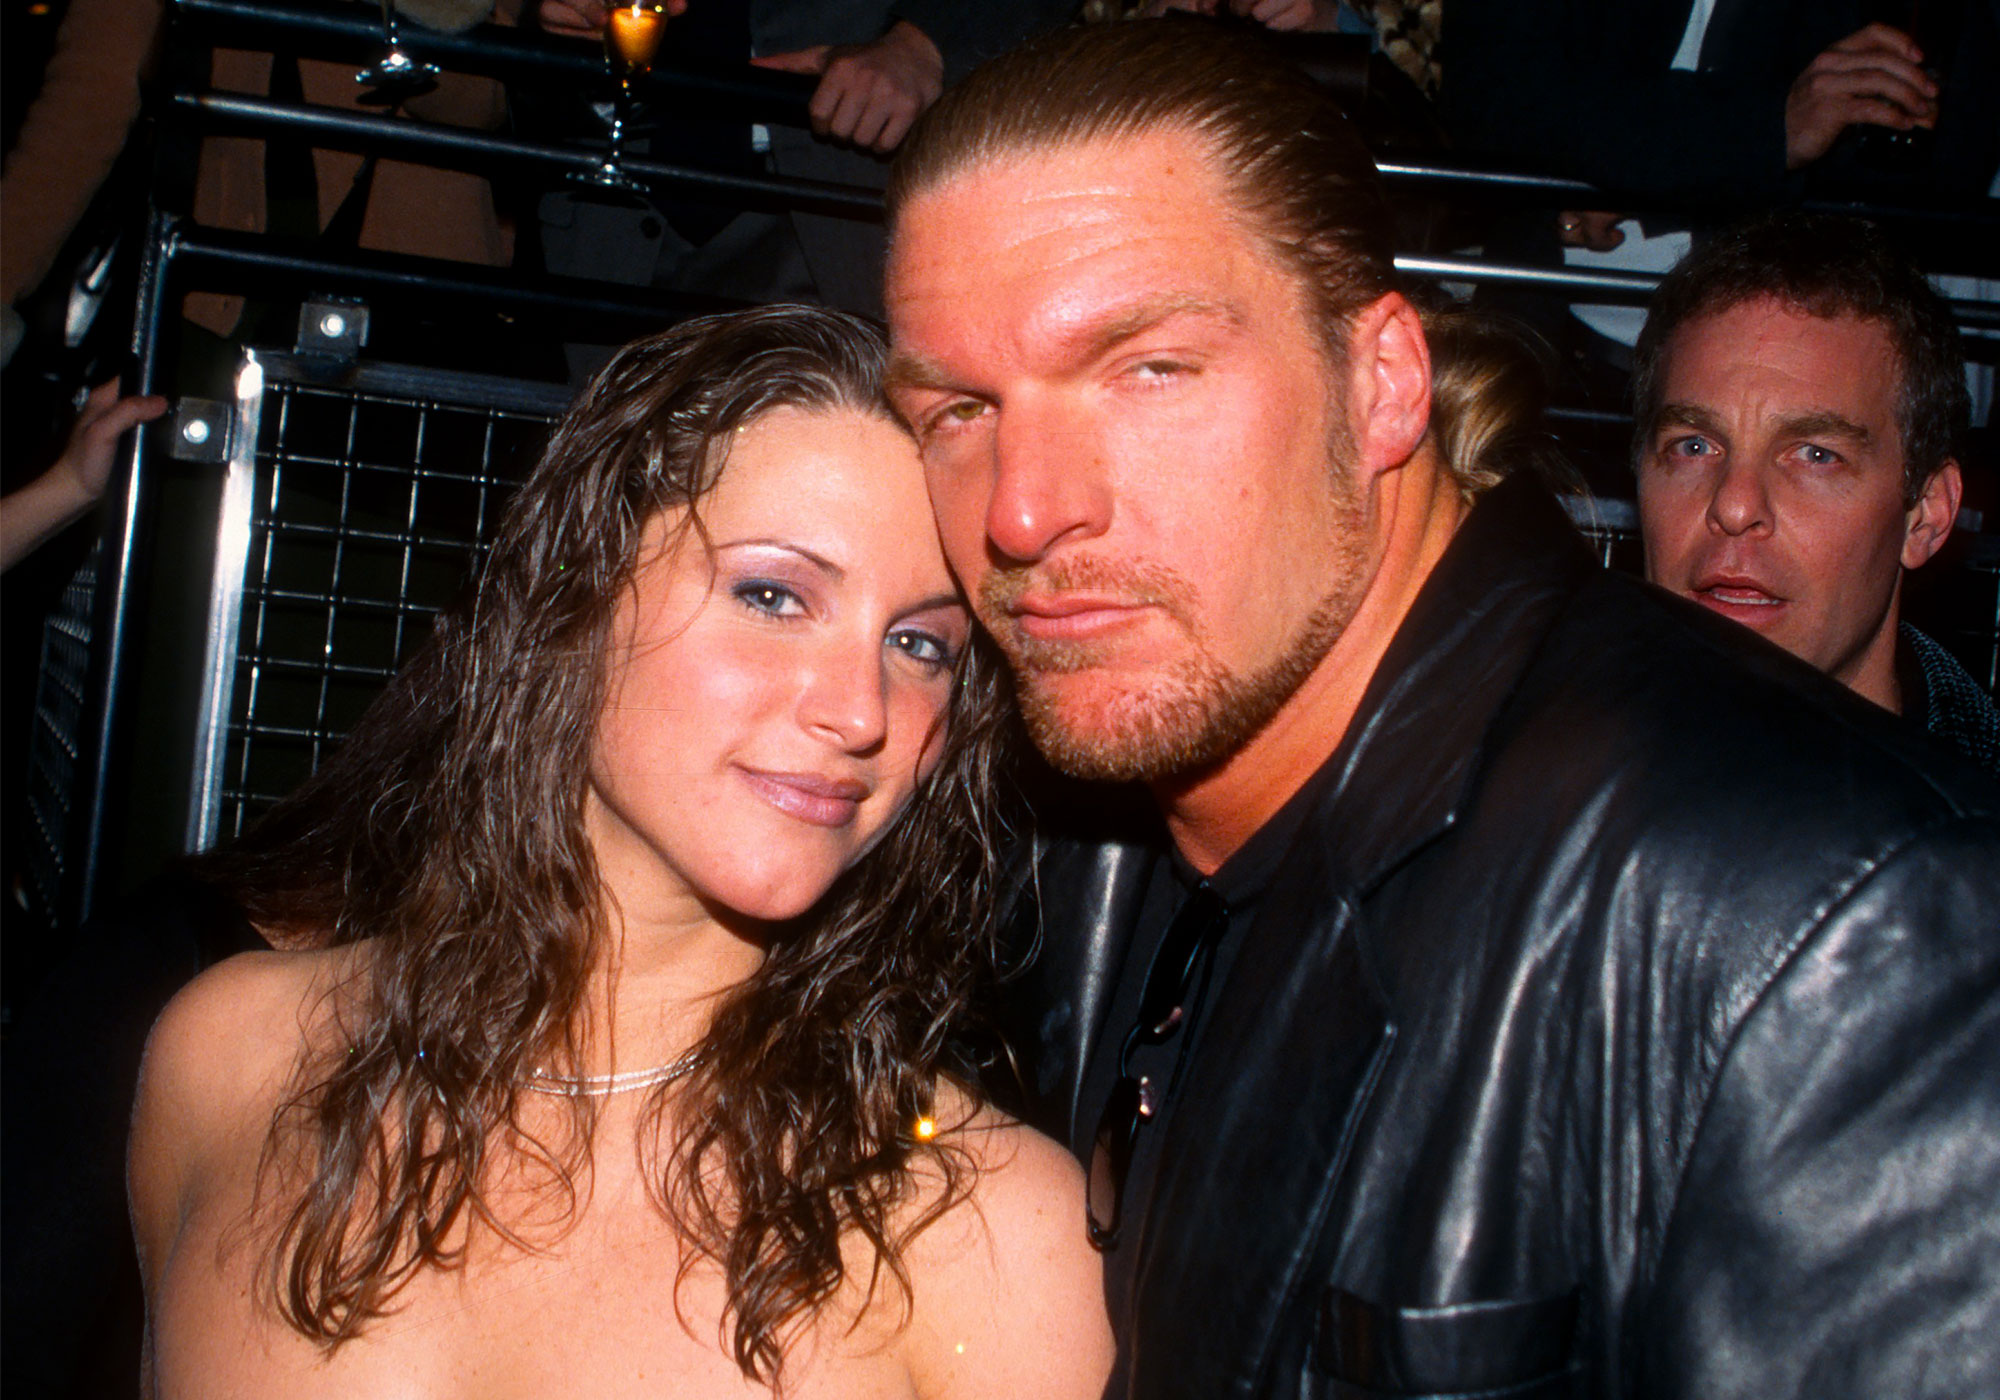 WWE's Stephanie McMahon and Wrestler Triple H's Relationship Timeline